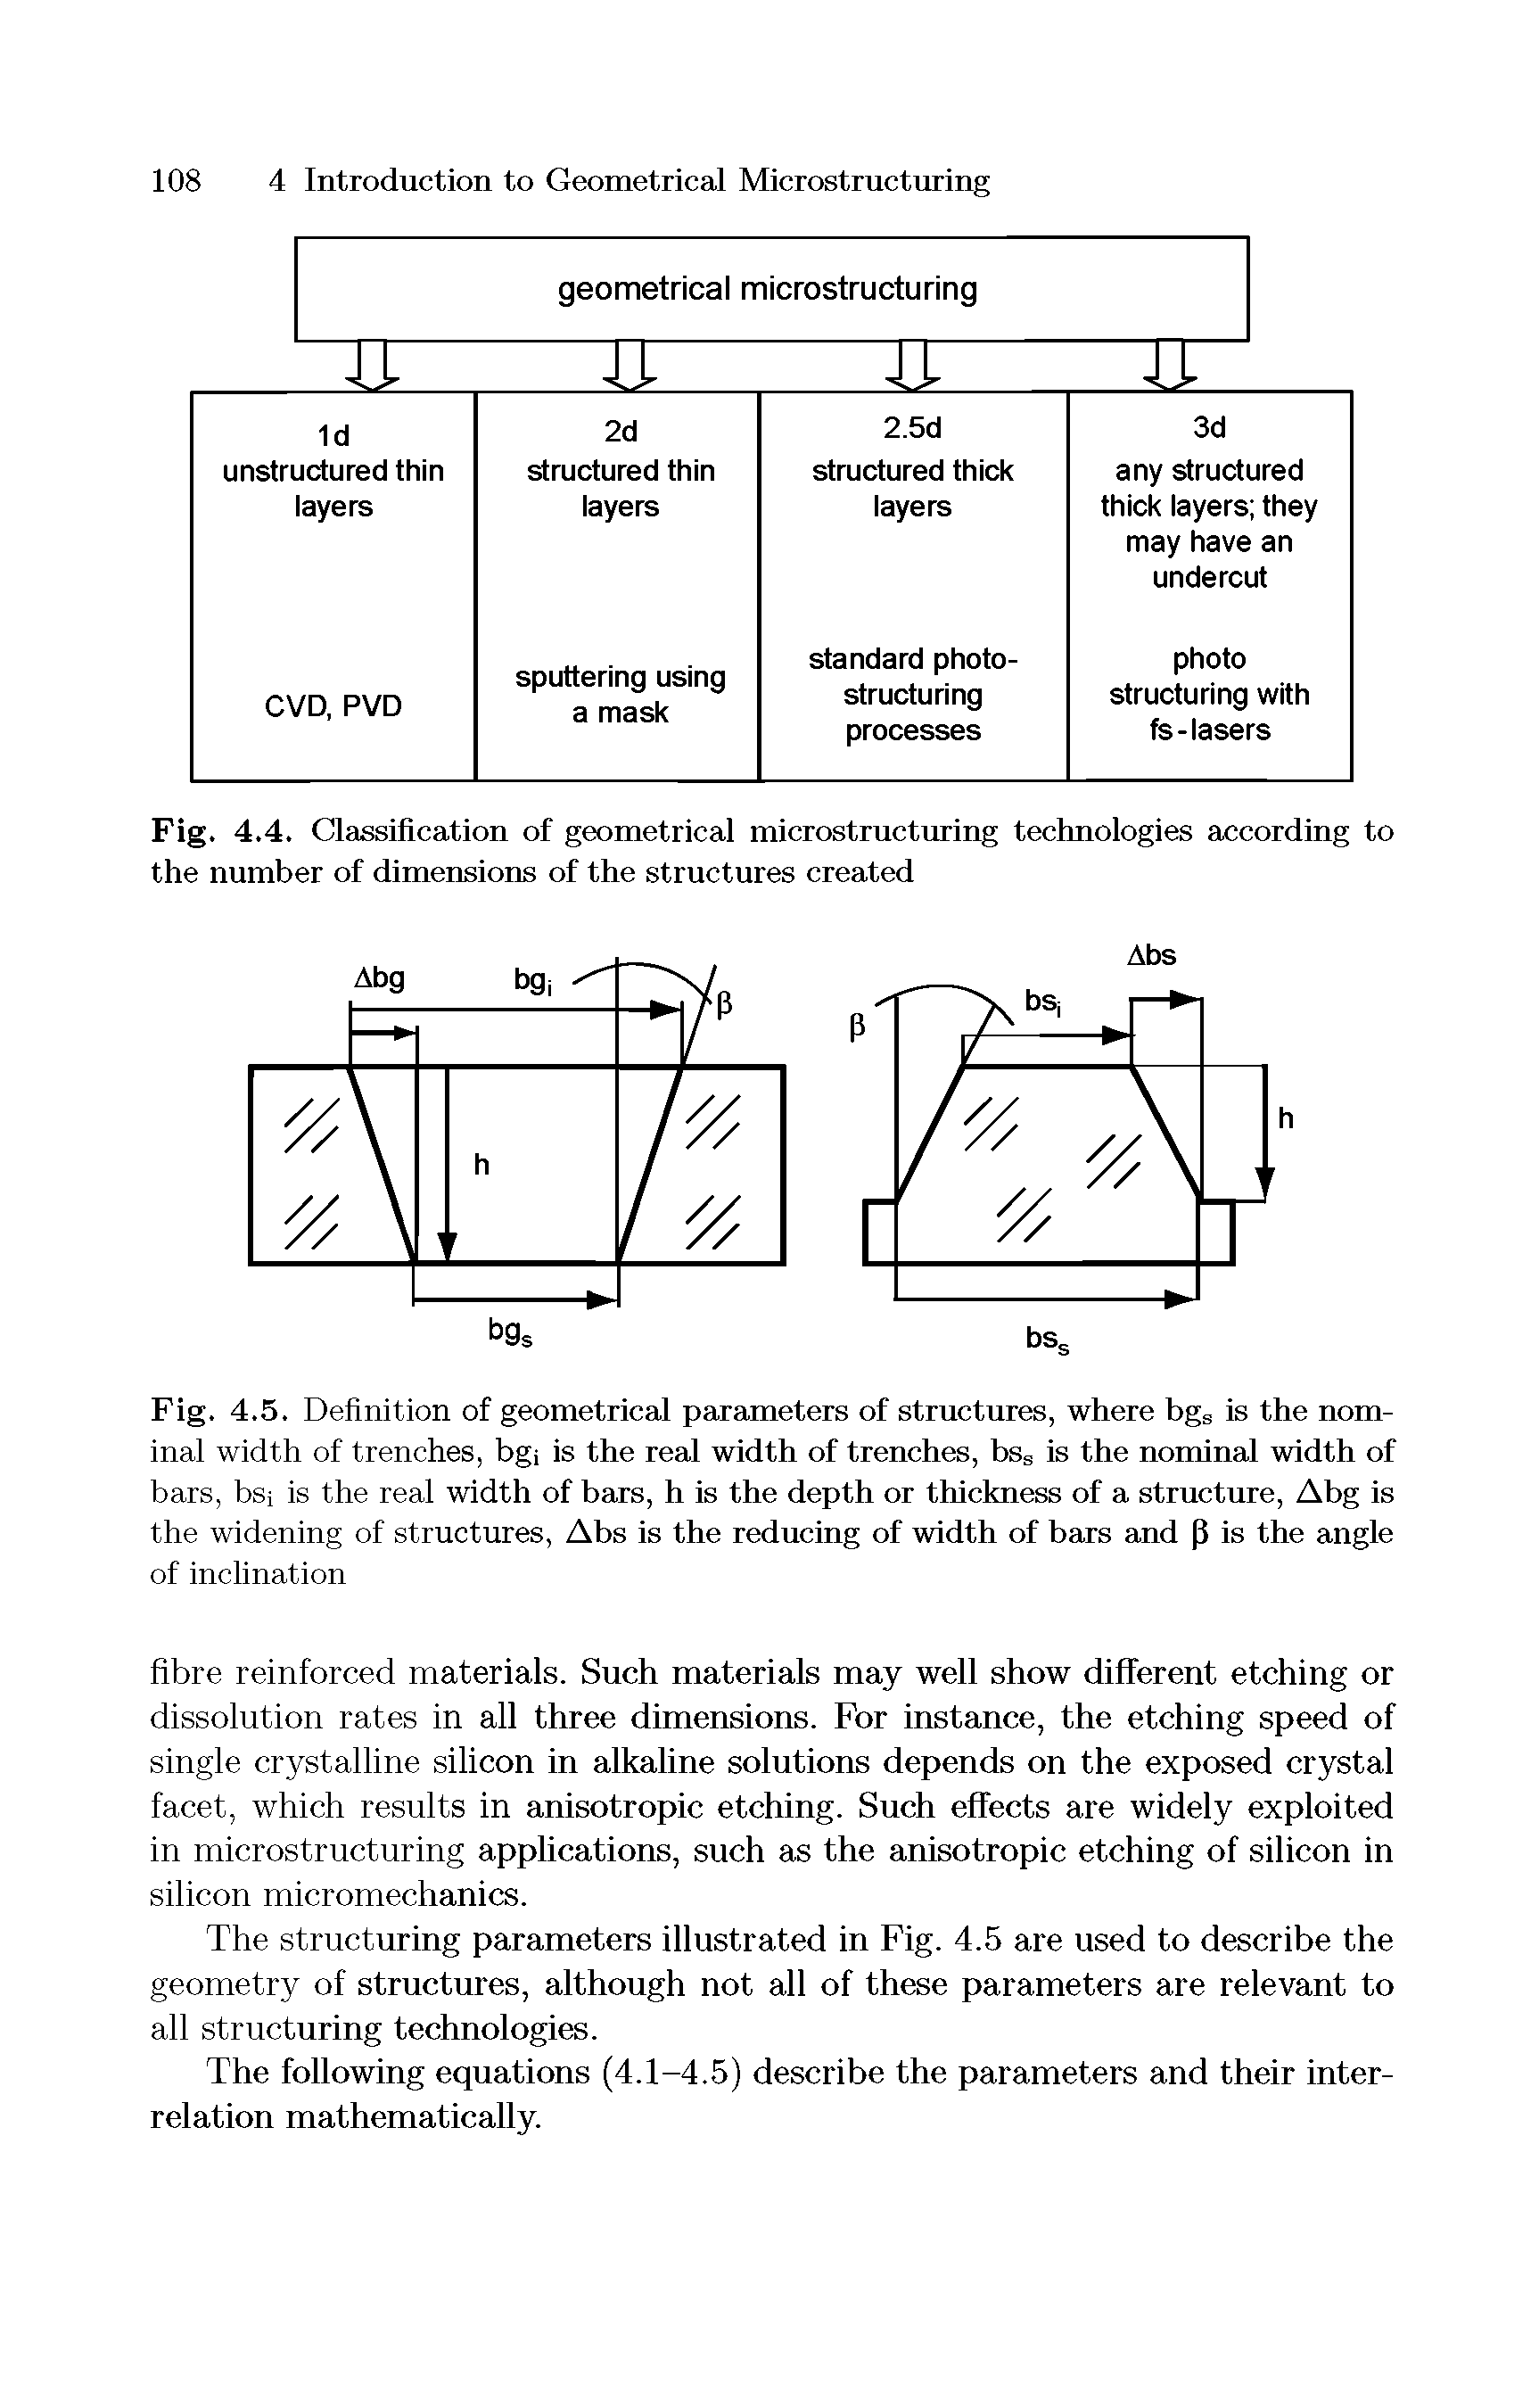 Fig. 4.5. Definition of geometrical parameters of structures, where bgs is the nominal width of trenches, bgi is the real width of trenches, bss is the nominal width of bars, bsi is the real width of bars, h is the depth or thickness of a structure, Abg is the widening of structures, Abs is the reducing of width of bars and P is the angle...